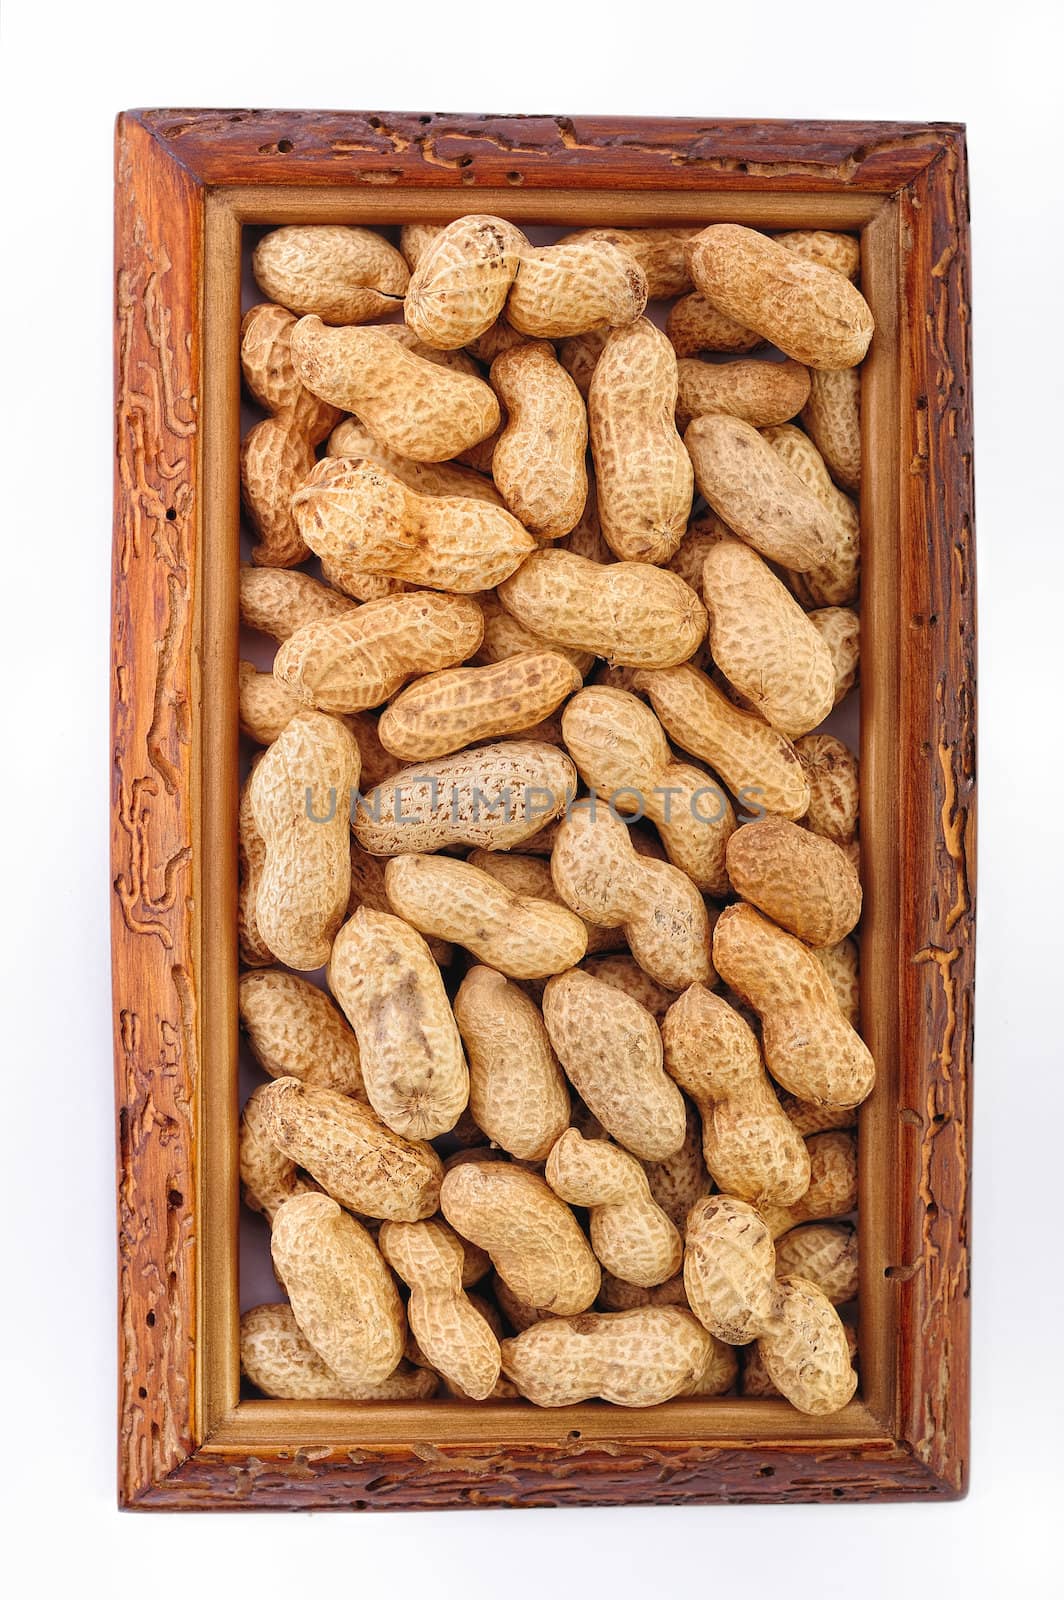 Unshelled nuts in a wooden frame on white background